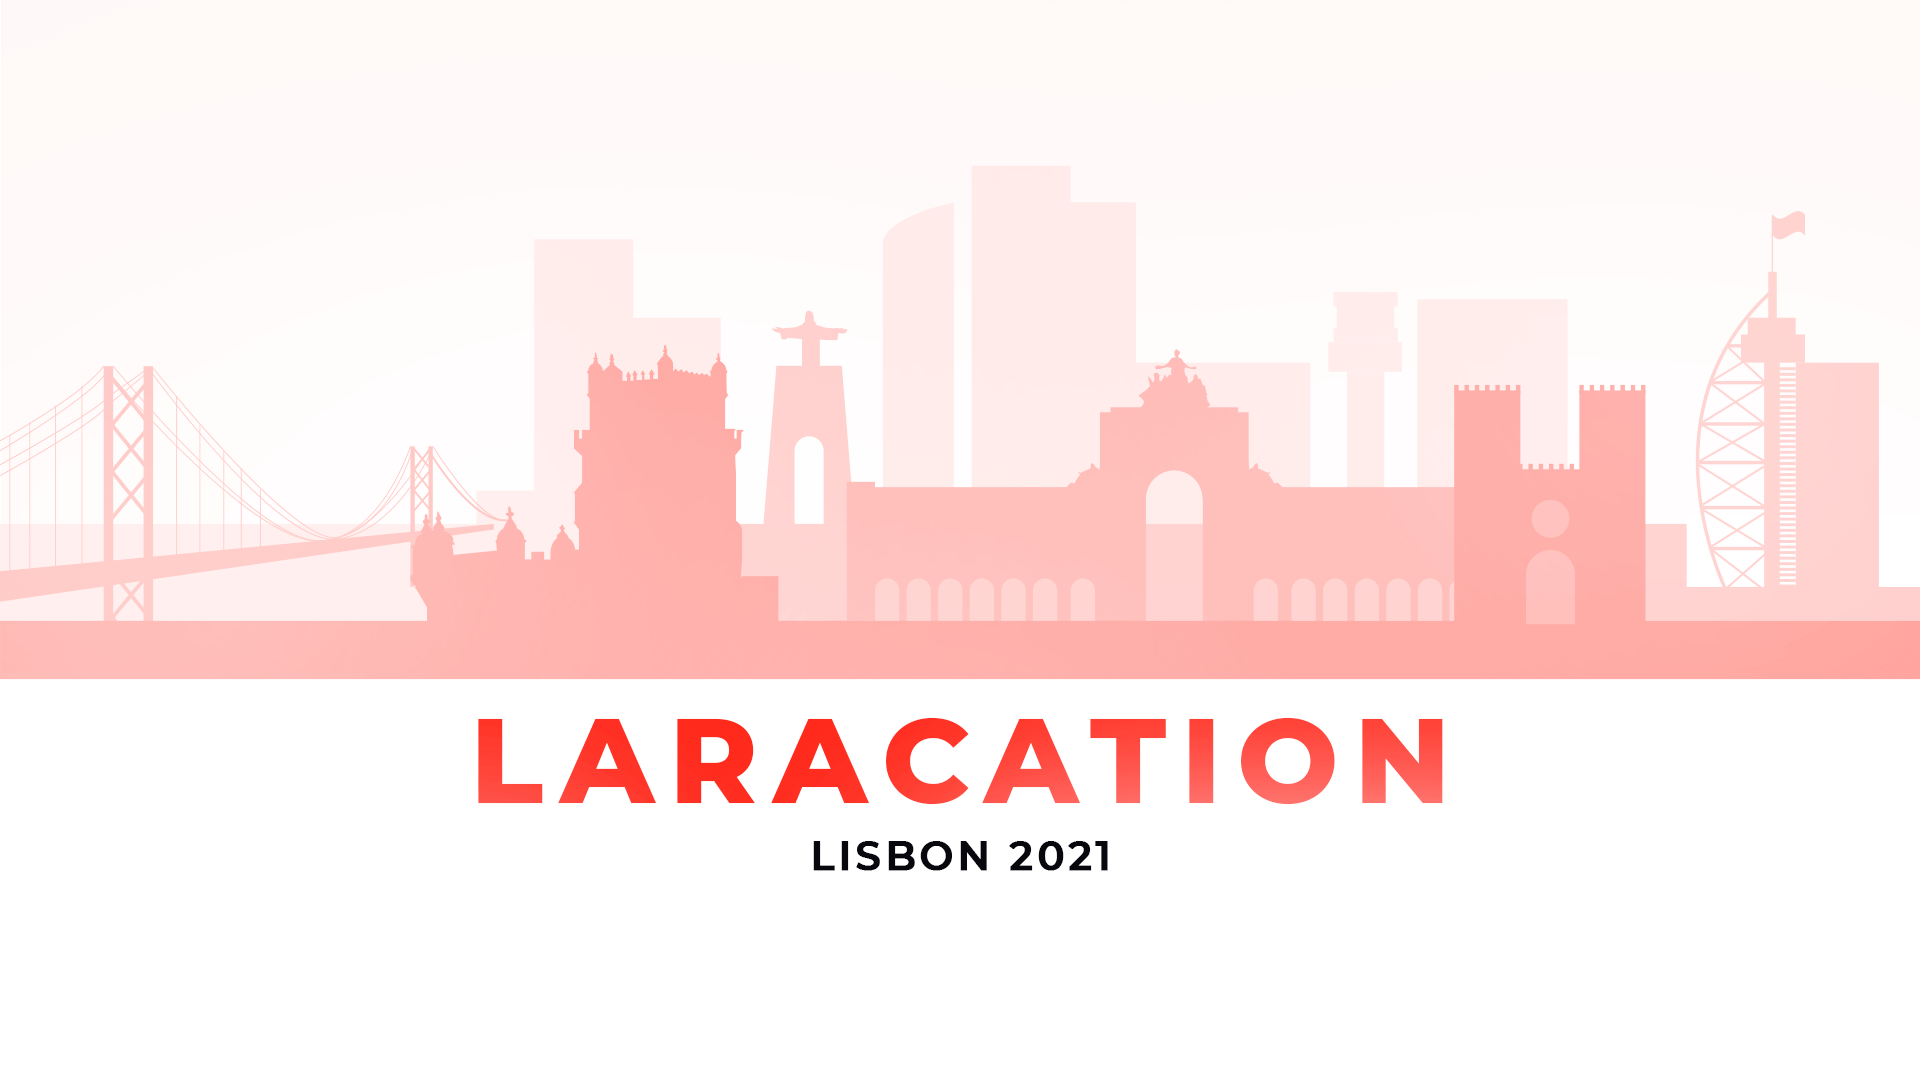 Banner with the Laracation logo showing the illustrated skyline of Lisbon